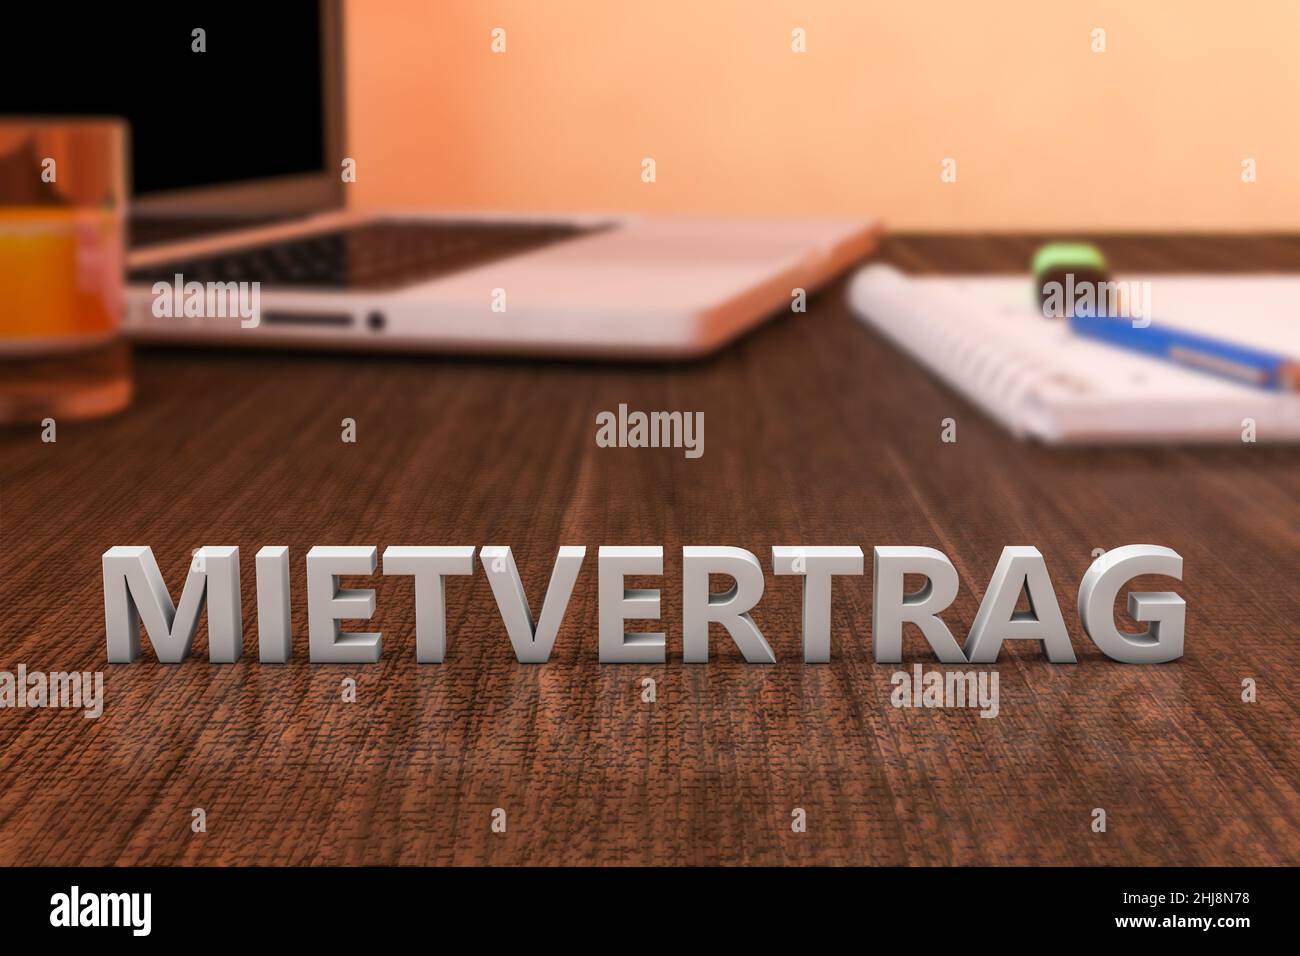 Mietvertrag - german word for rent contract or lease agreement - letters on wooden desk with laptop computer and a notebook. 3d render illustration. Stock Photo